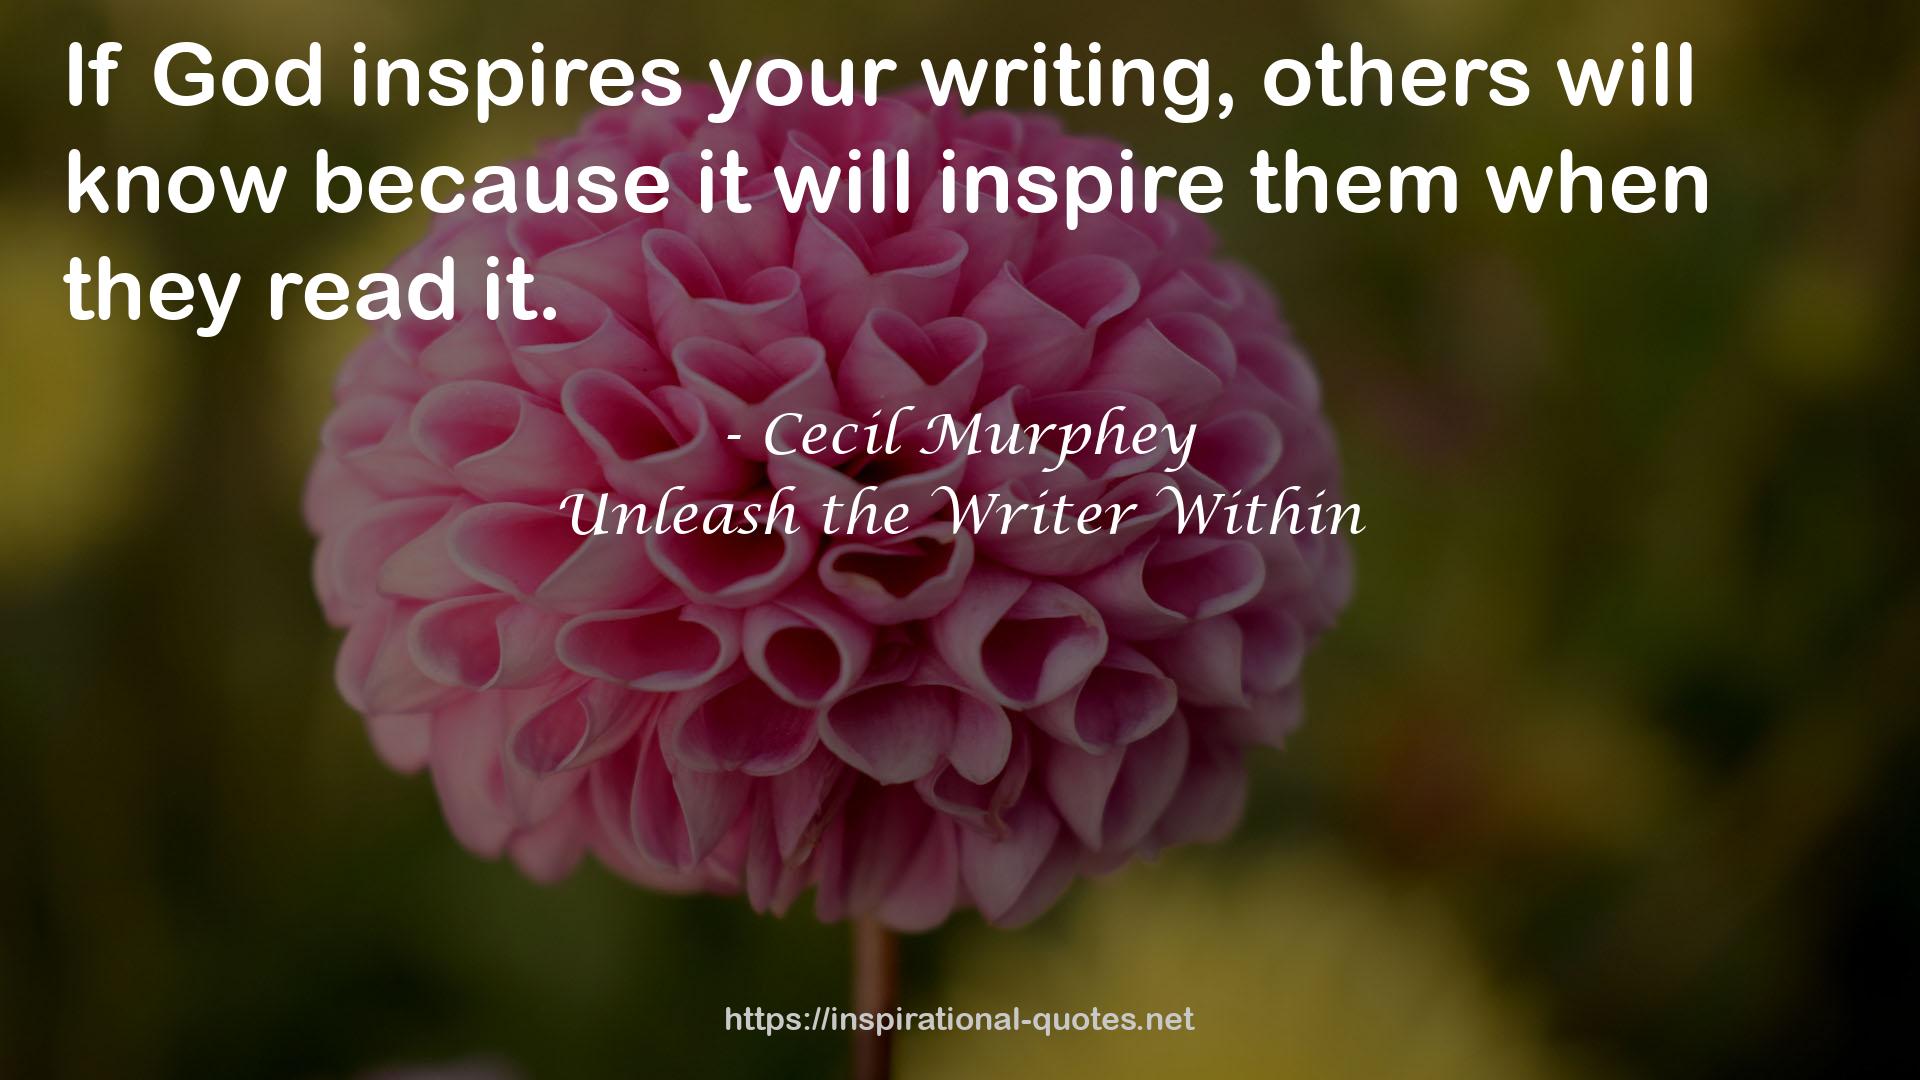 Cecil Murphey QUOTES